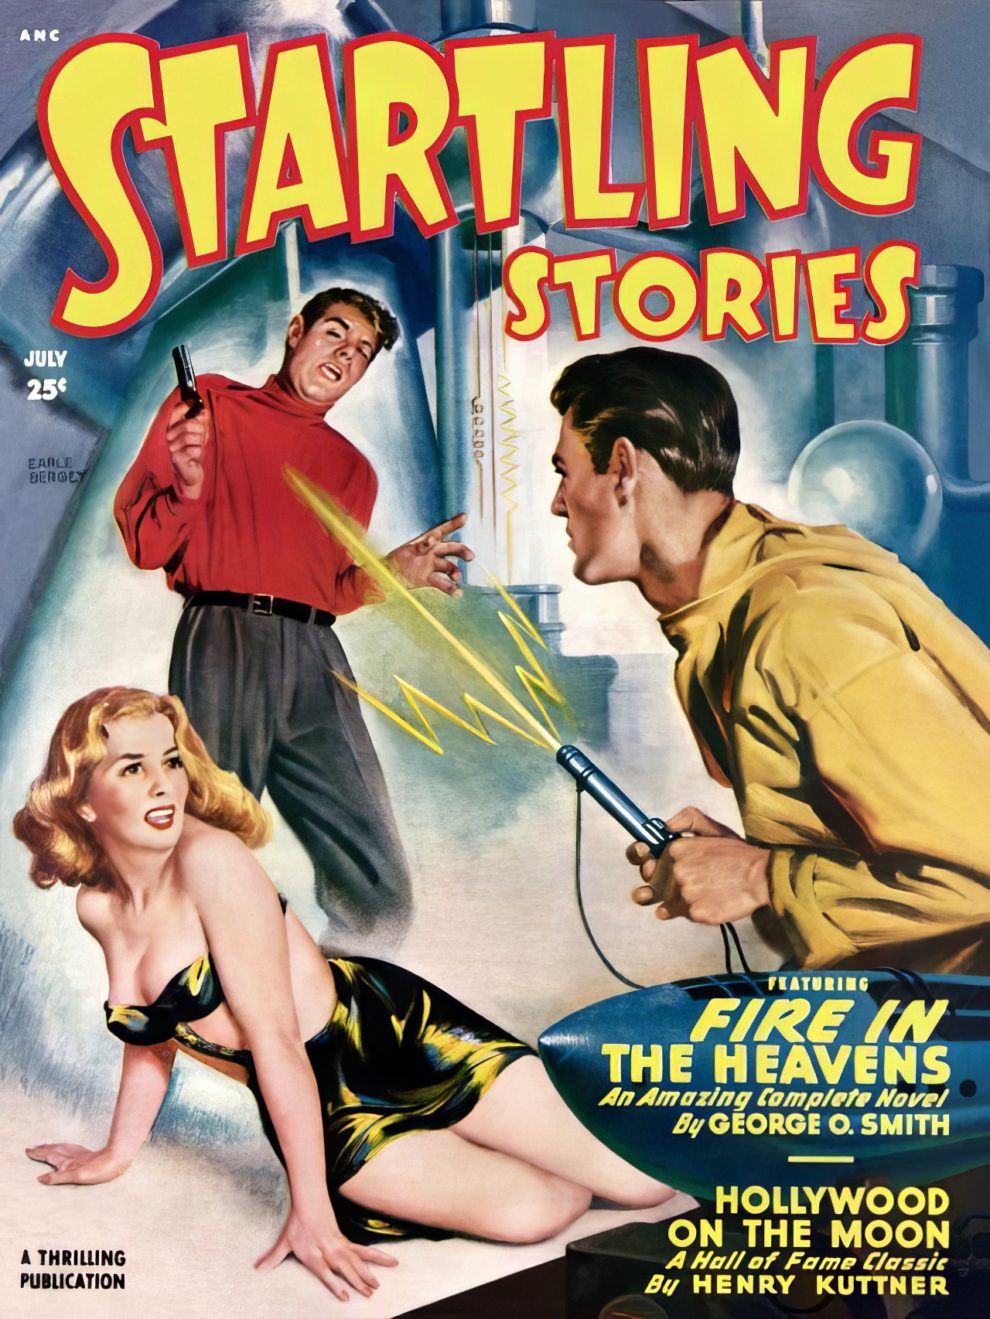 Startling Stories Covers 1940s 46 